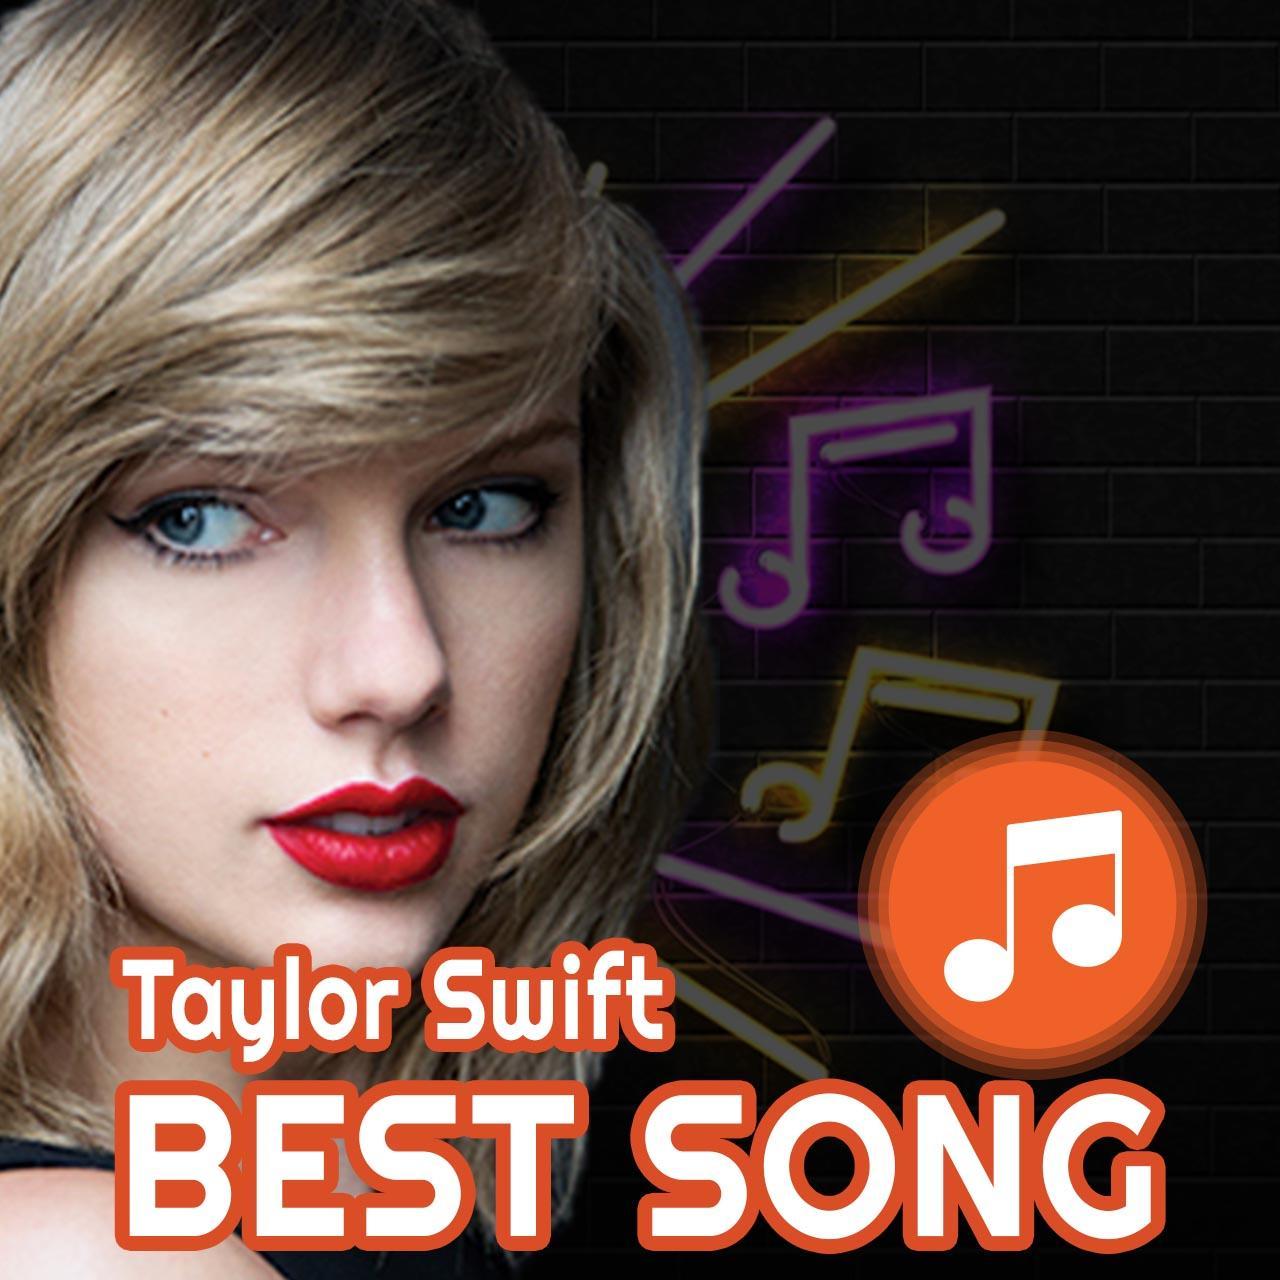 Taylor Swift Me Best Songs 2019 For Android Apk Download